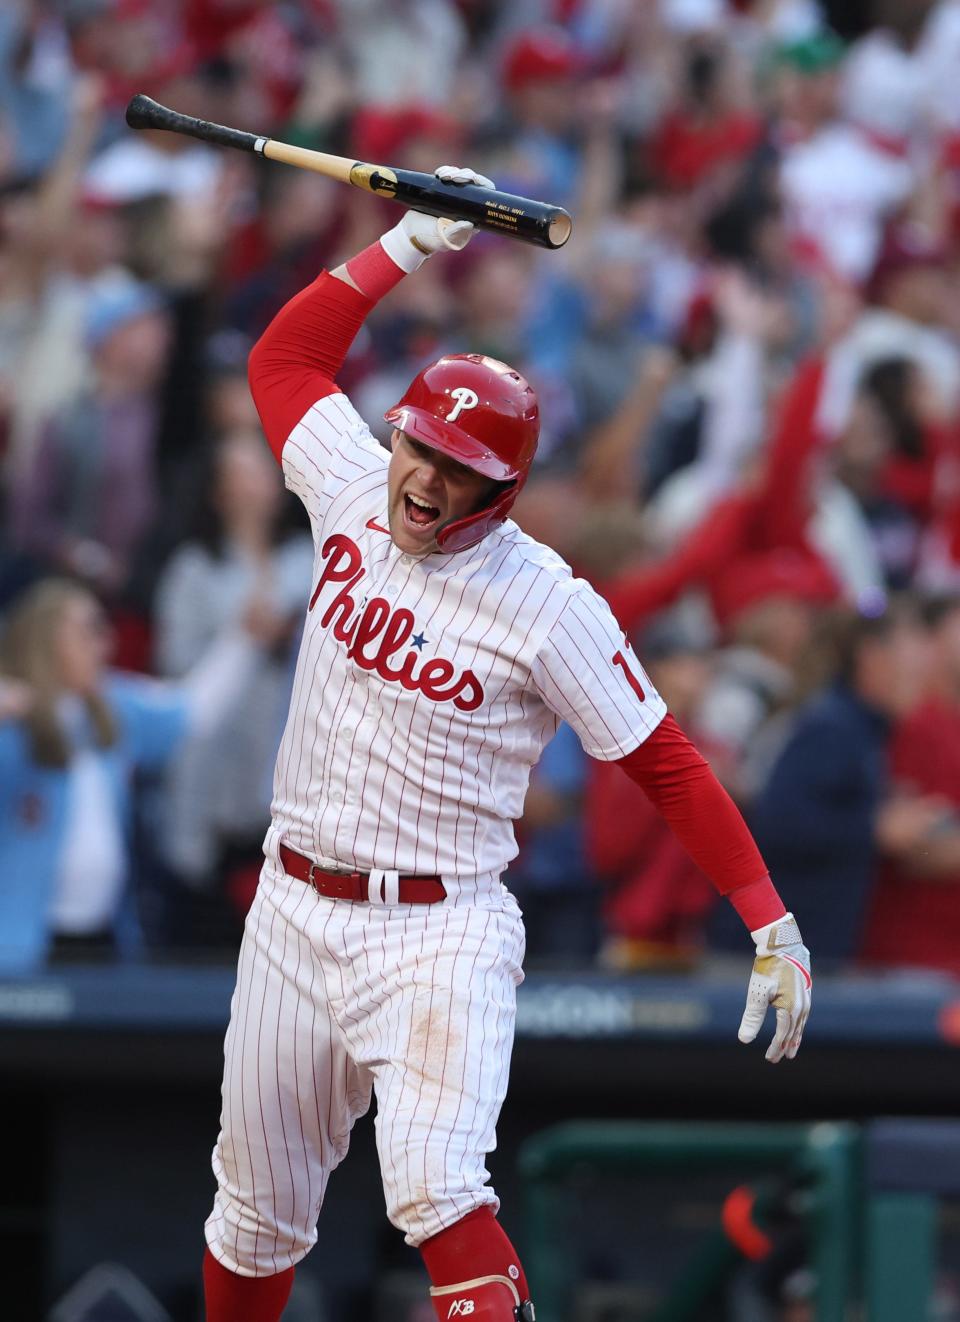 Philadelphia Phillies first baseman Rhys Hoskins celebrates after hitting a three-run home run against the Atlanta Braves during the third inning in Game 3 of the NLDS for the 2022 MLB Playoffs at Citizens Bank Park in Philadelphia on Oct. 14, 2022.